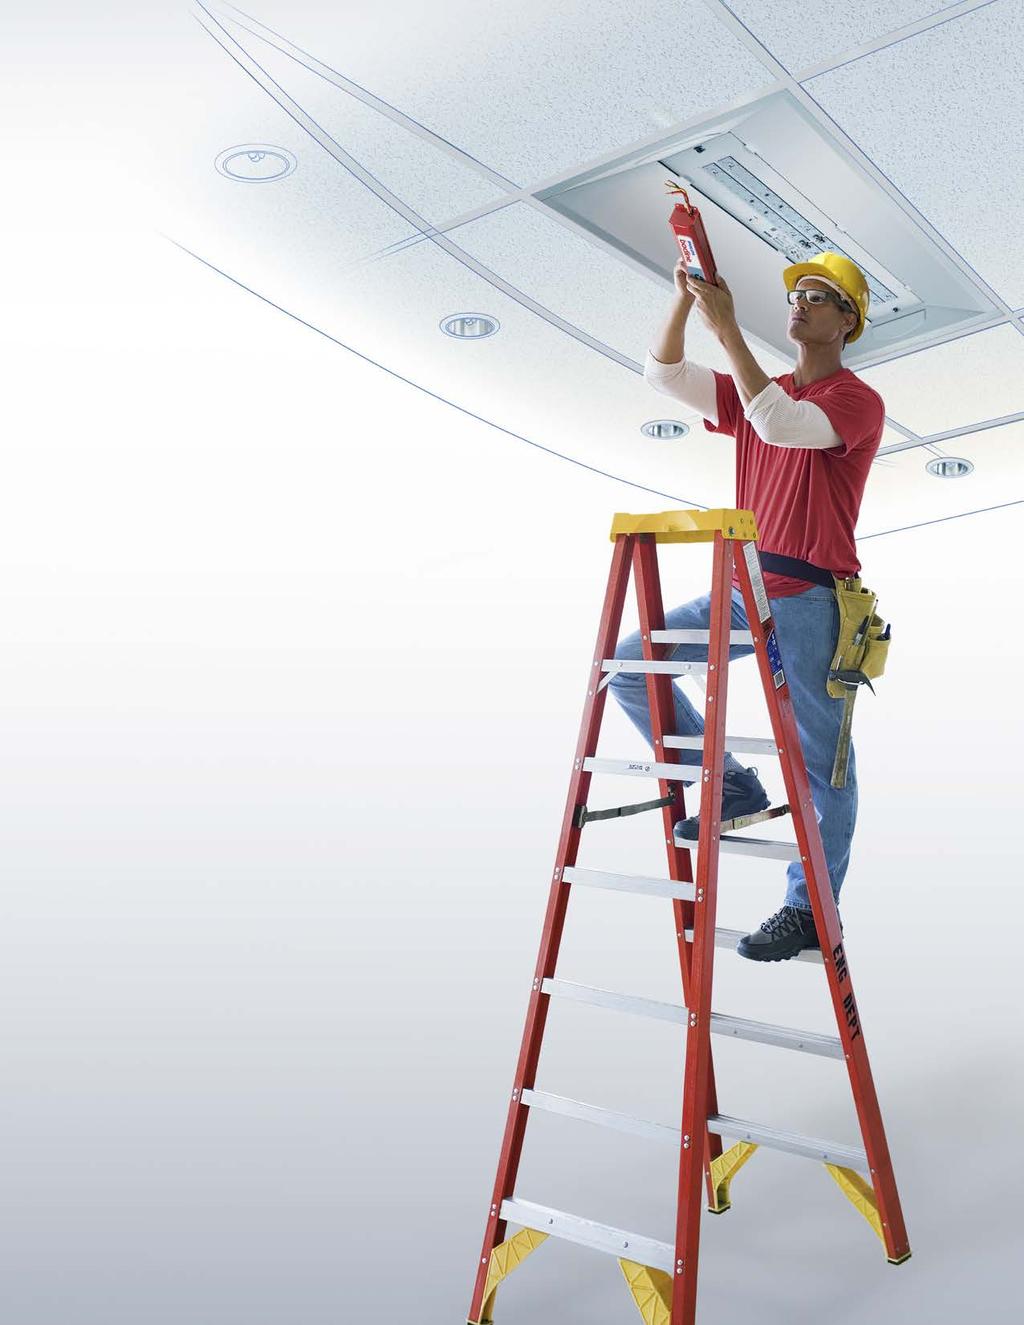 Convert existing LED luminaires into code-required emergency lighting.